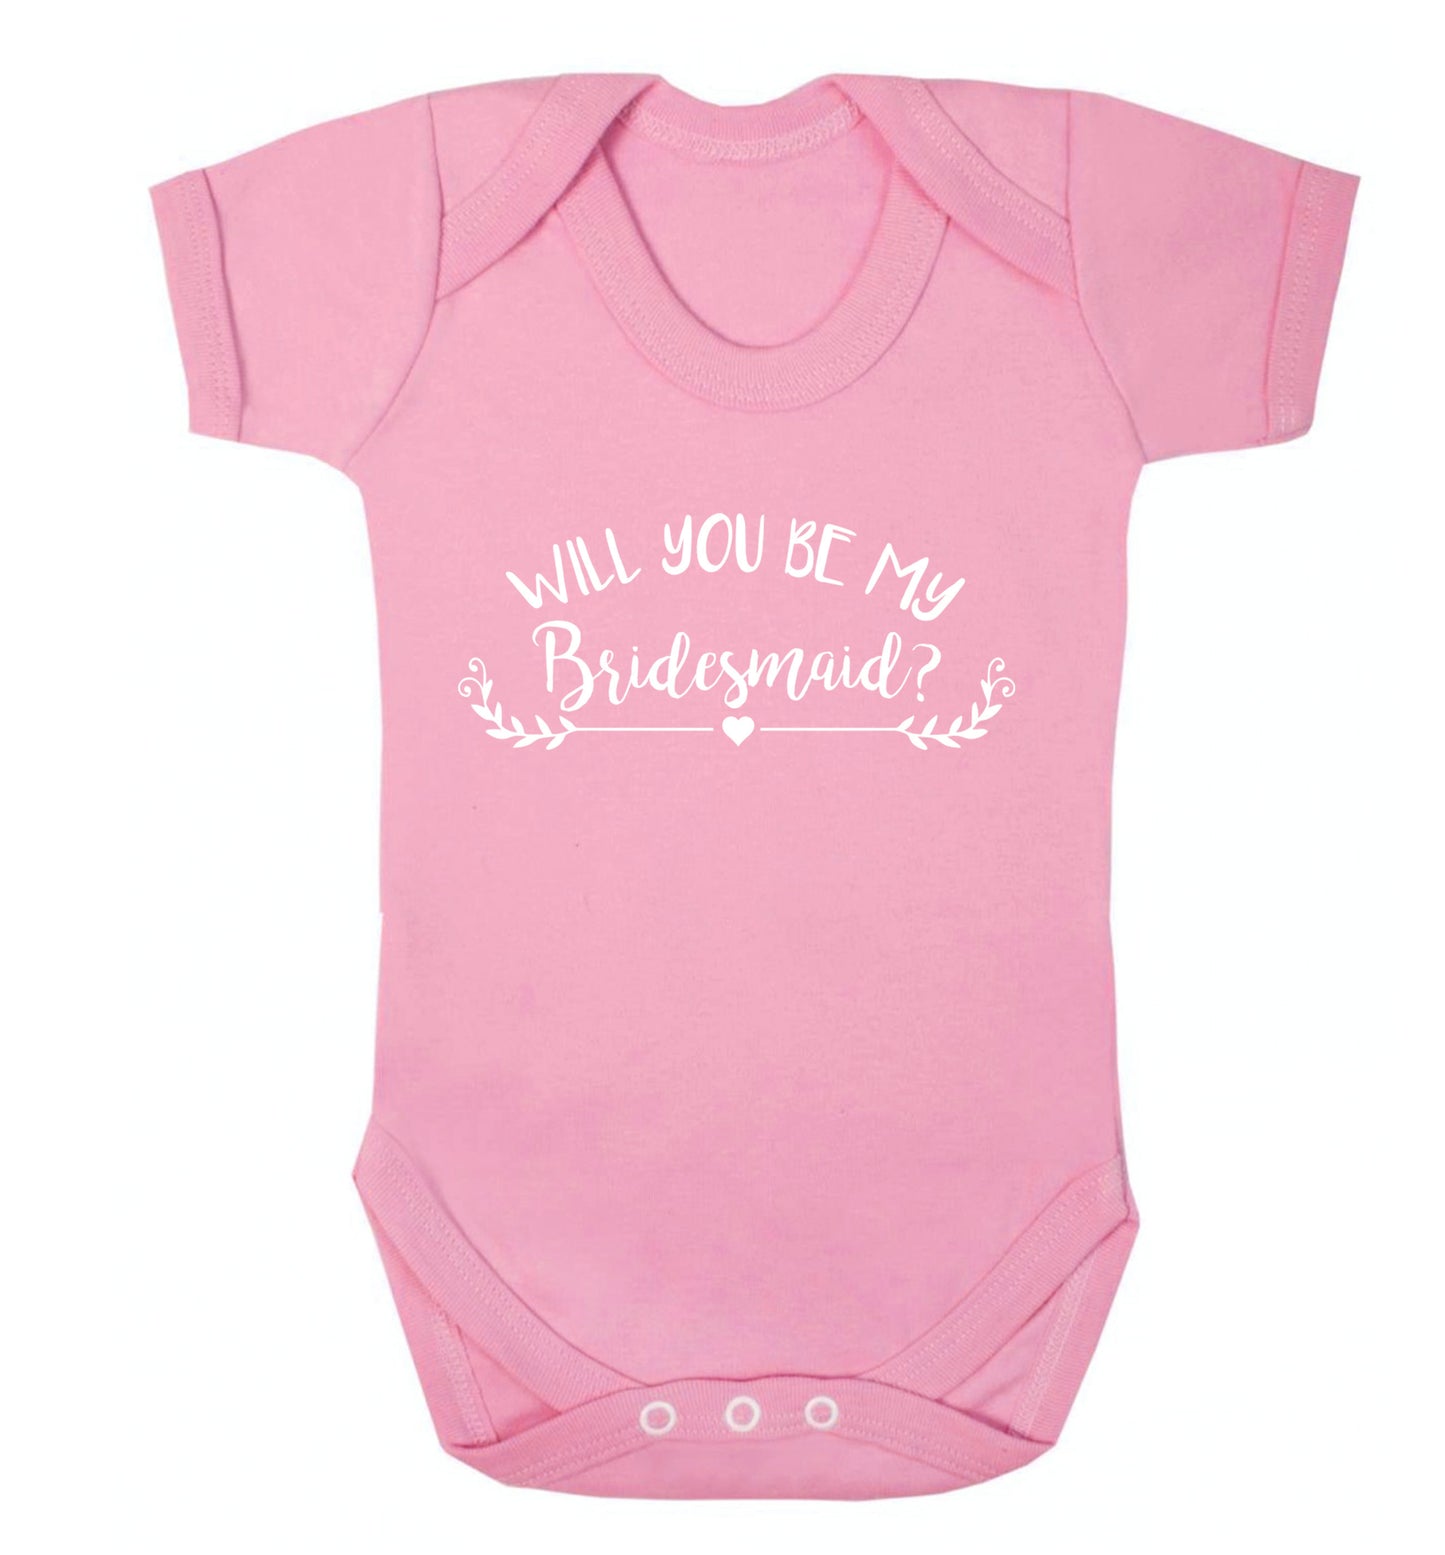 Will you be my bridesmaid? Baby Vest pale pink 18-24 months